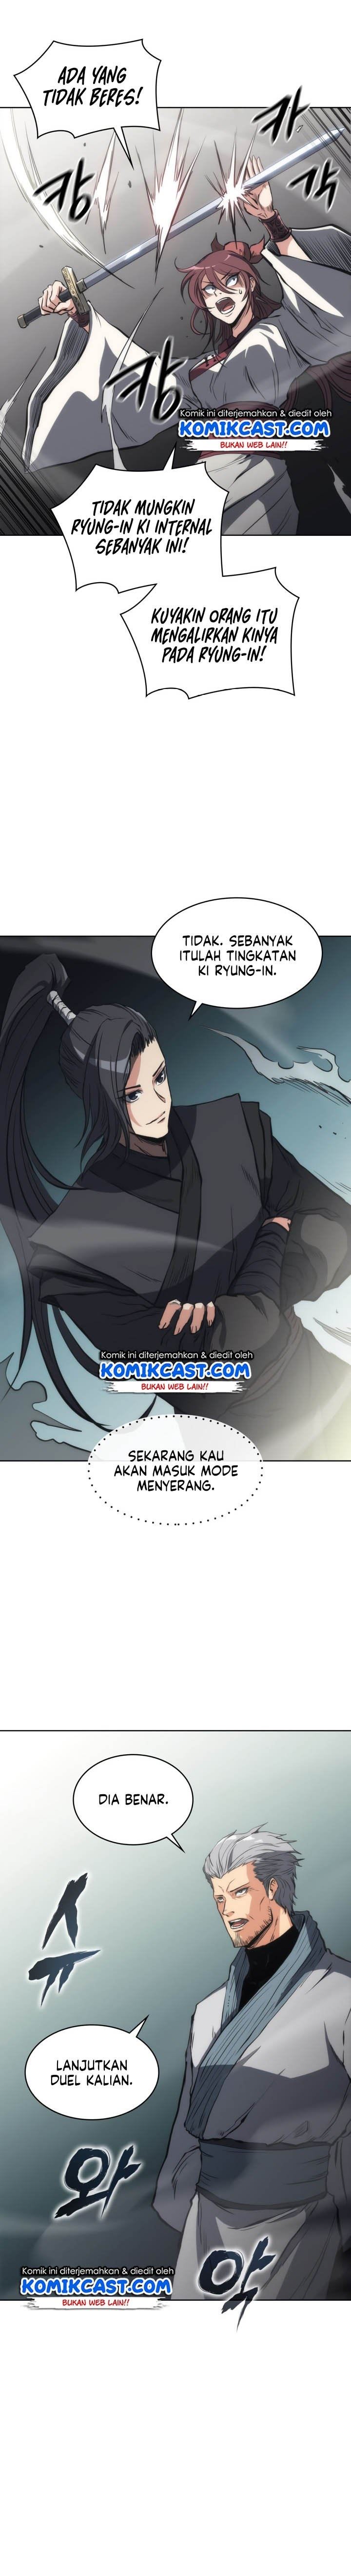 MookHyang – The Origin Chapter 26